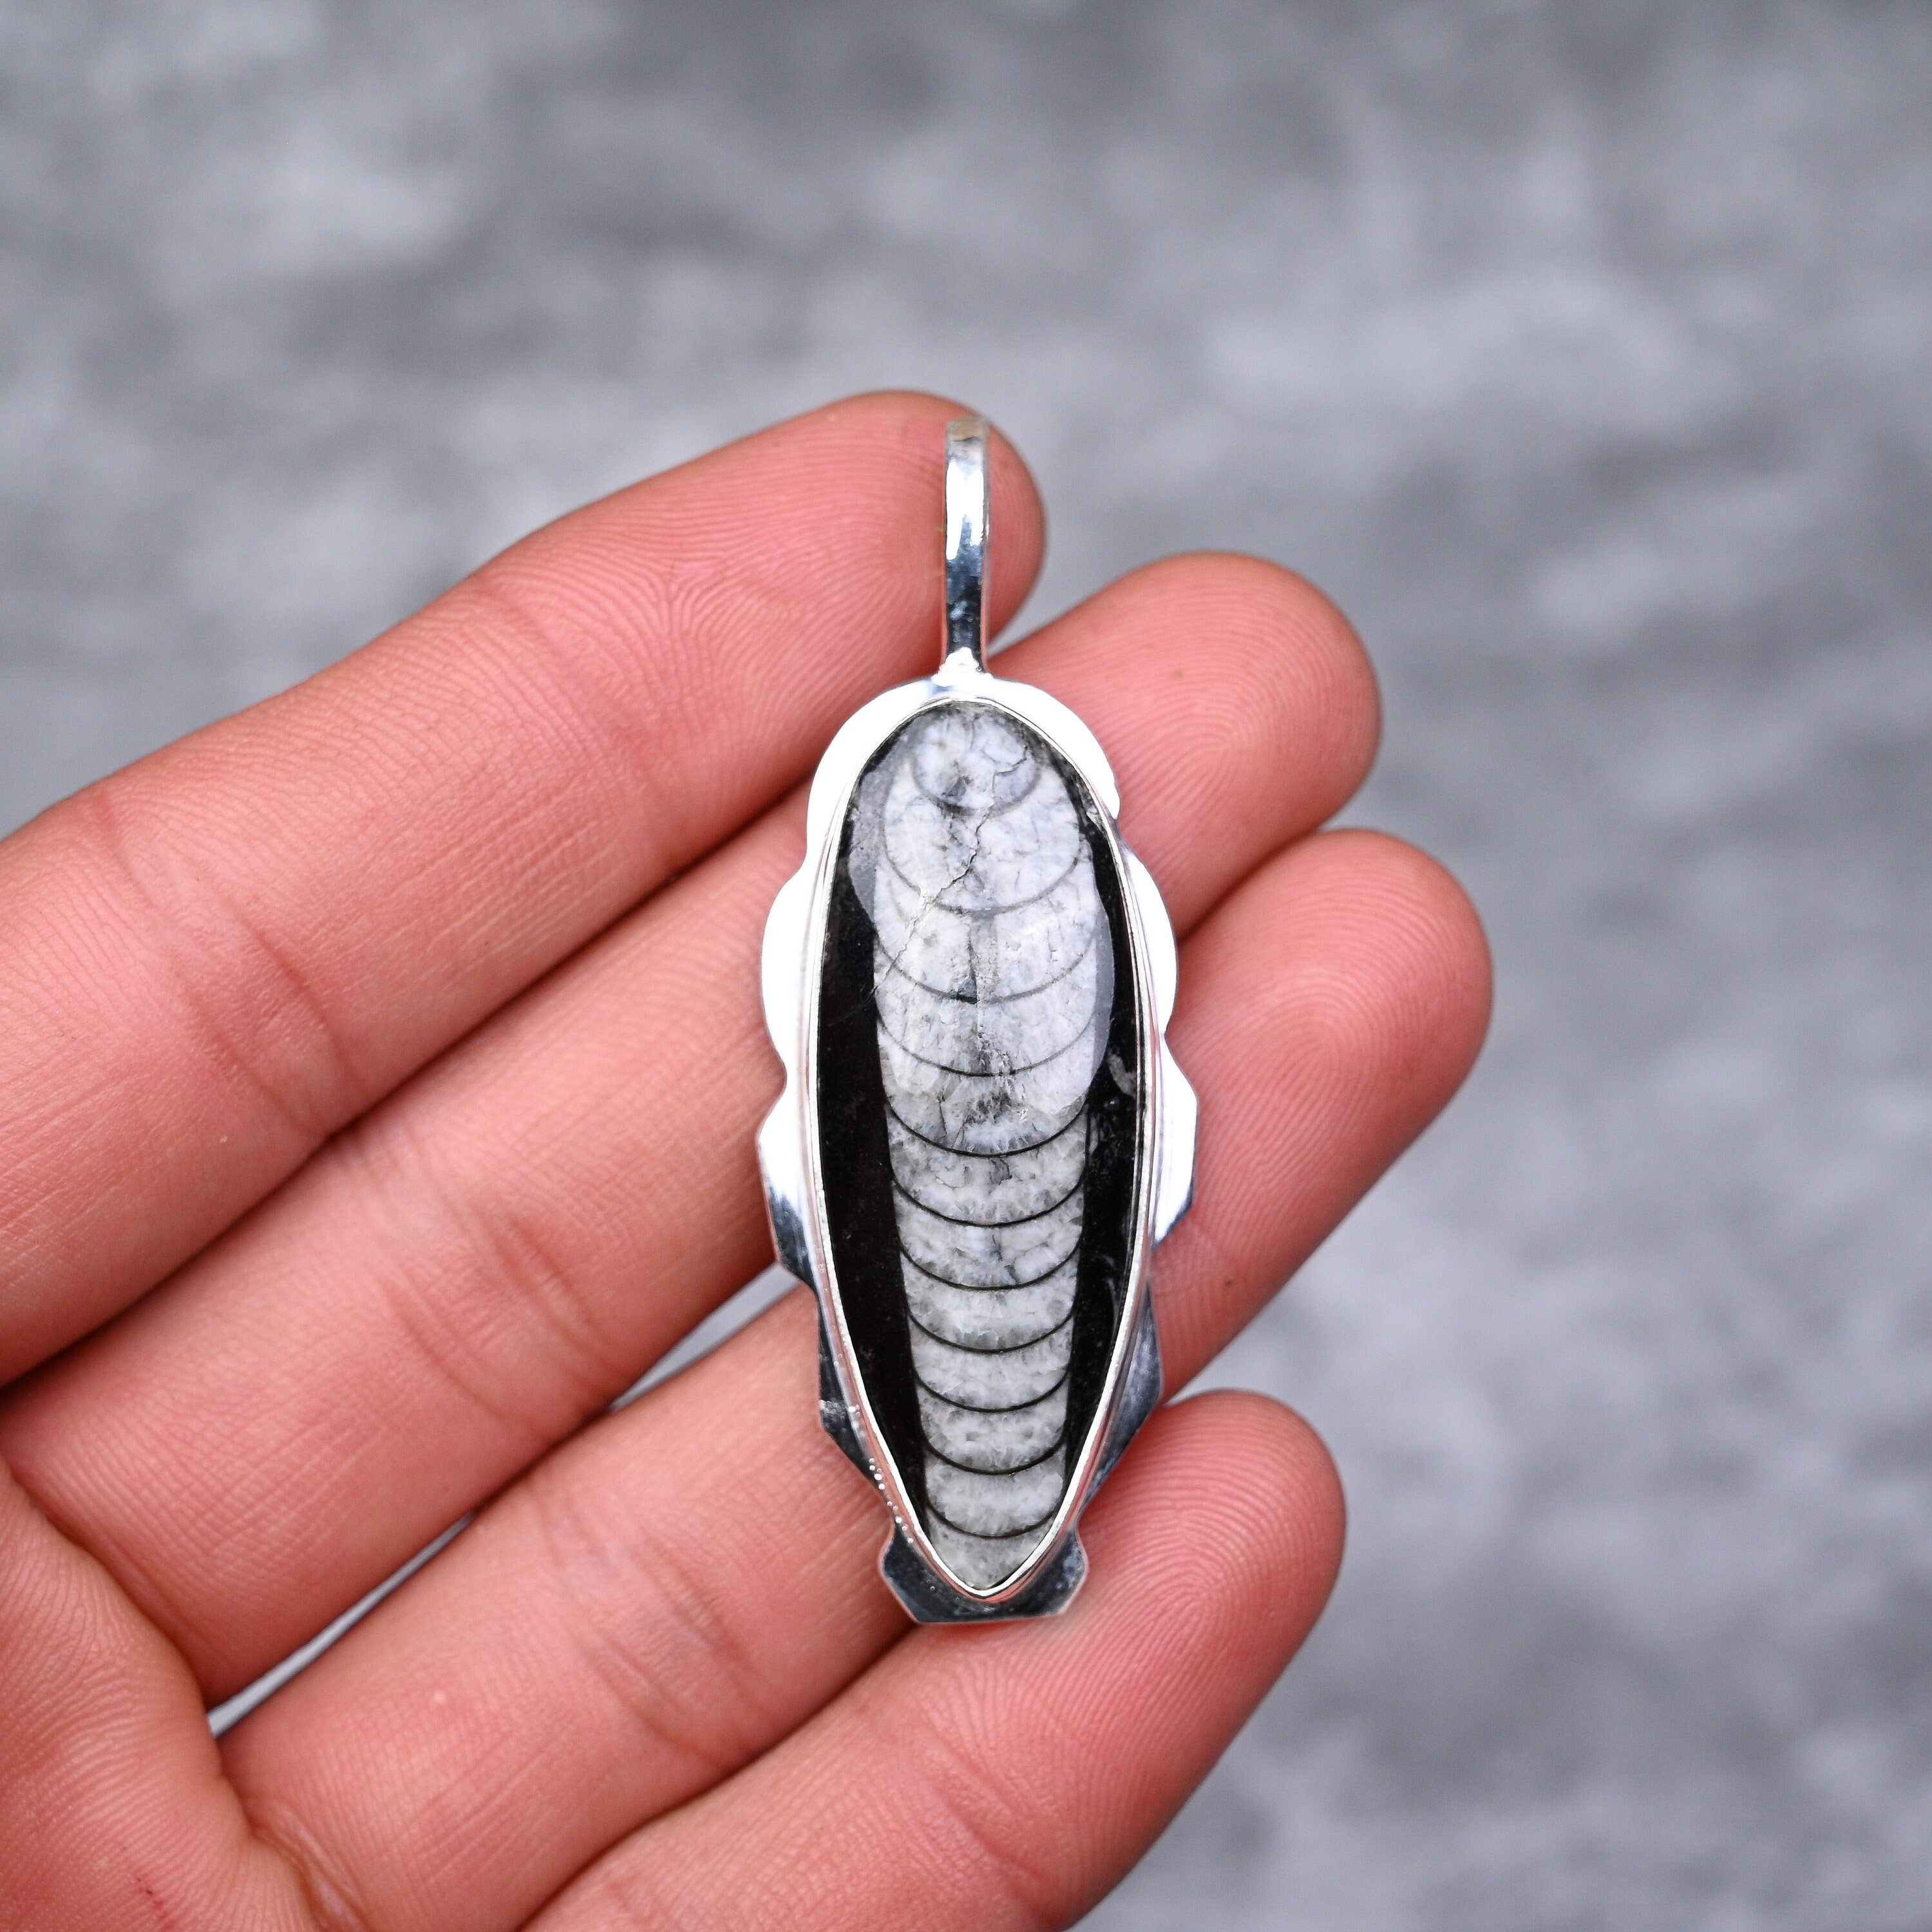 Fossil, Jewelry, Fossil Charm Necklace Charm Holder With Key Silver